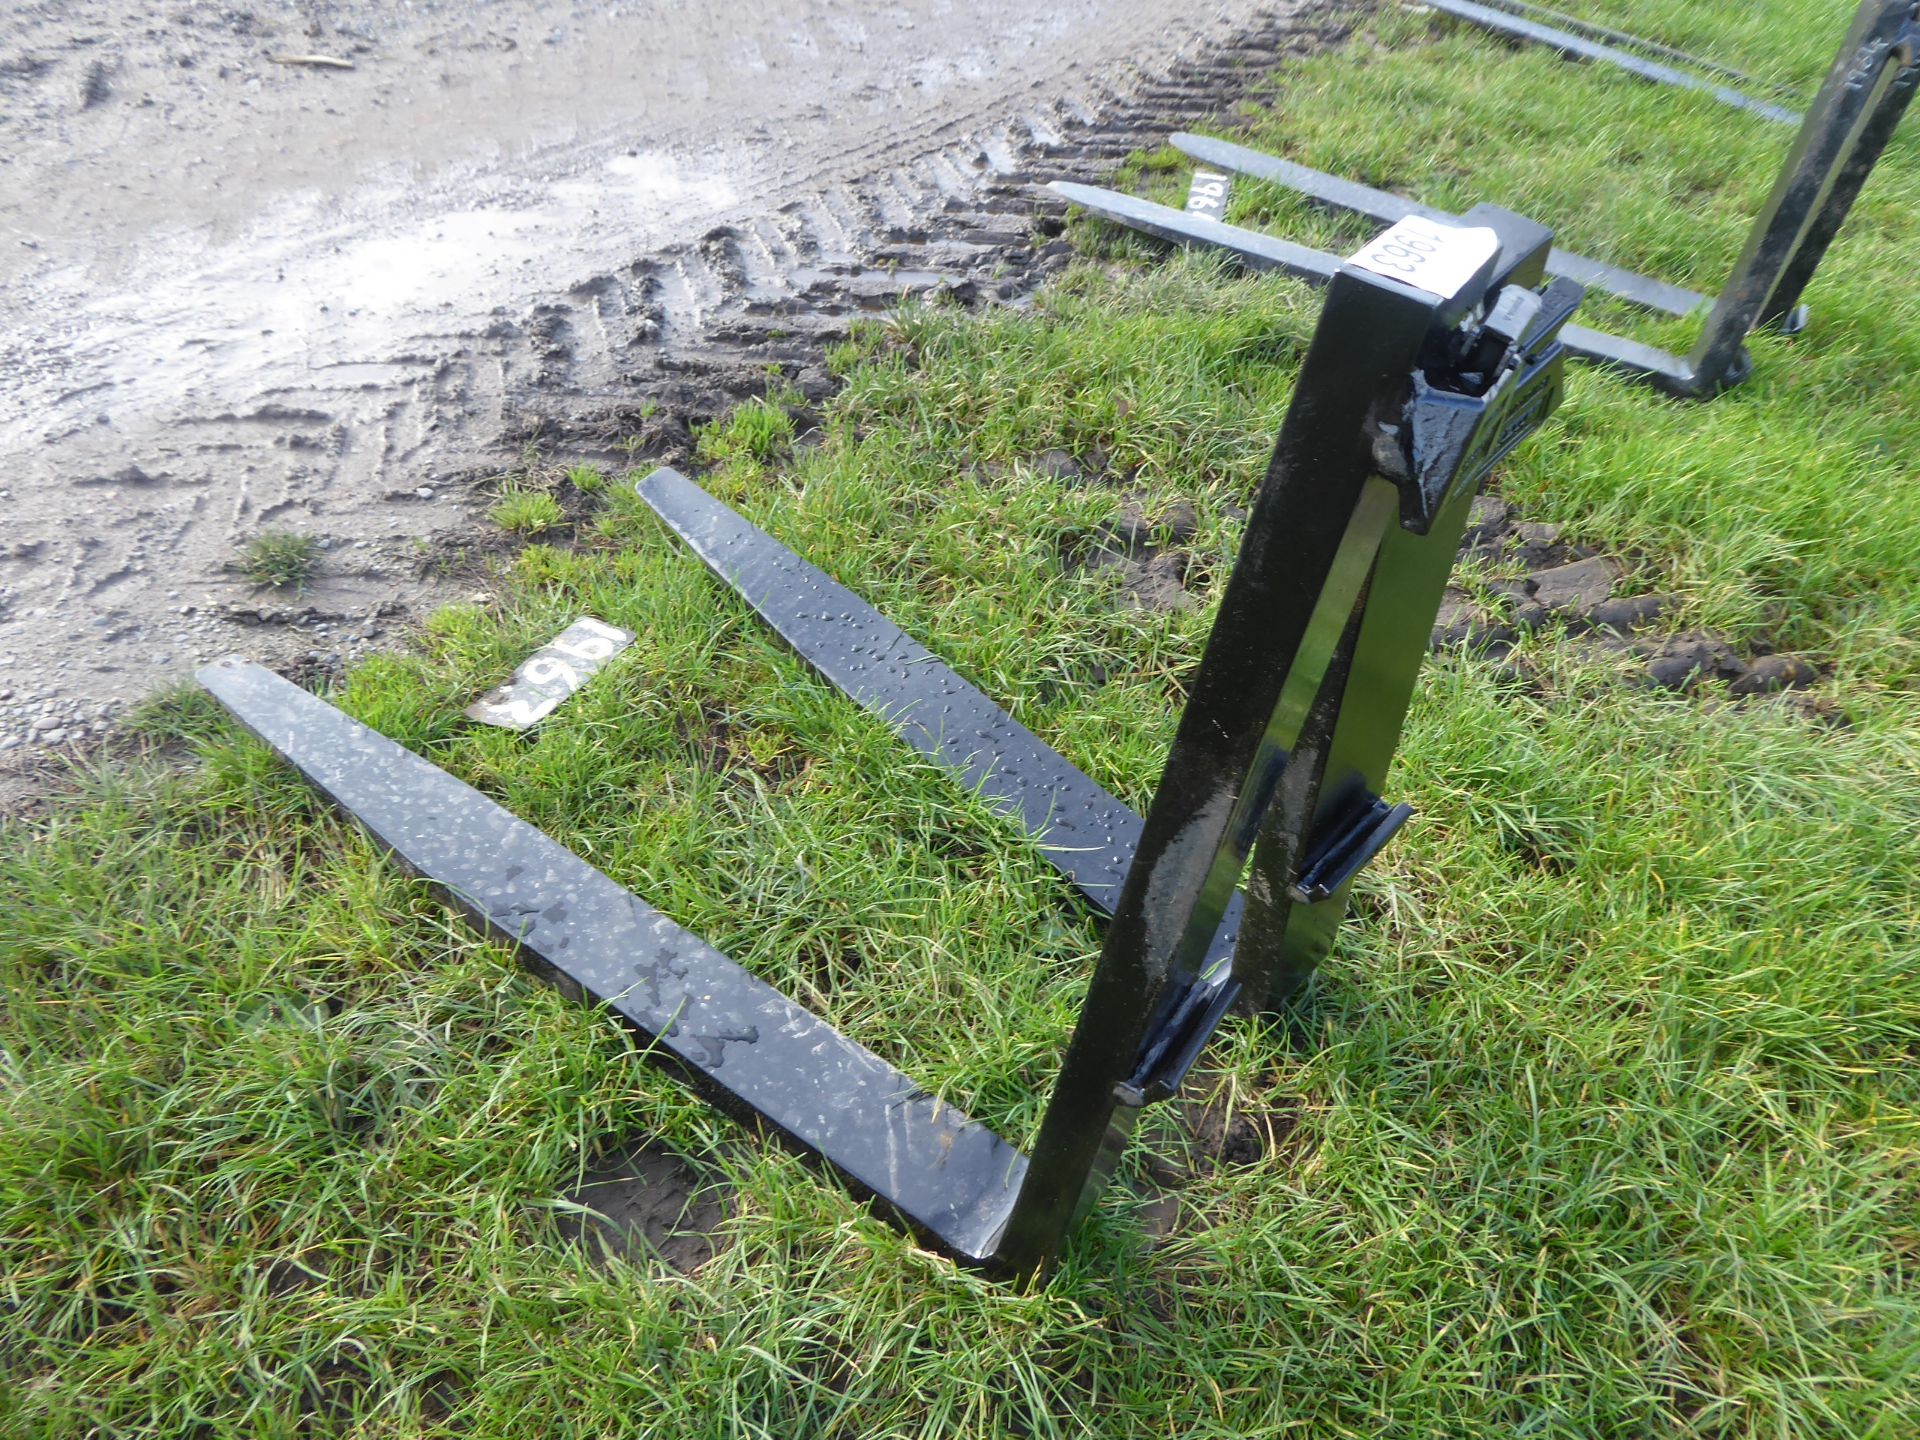 Pair of forklift tines